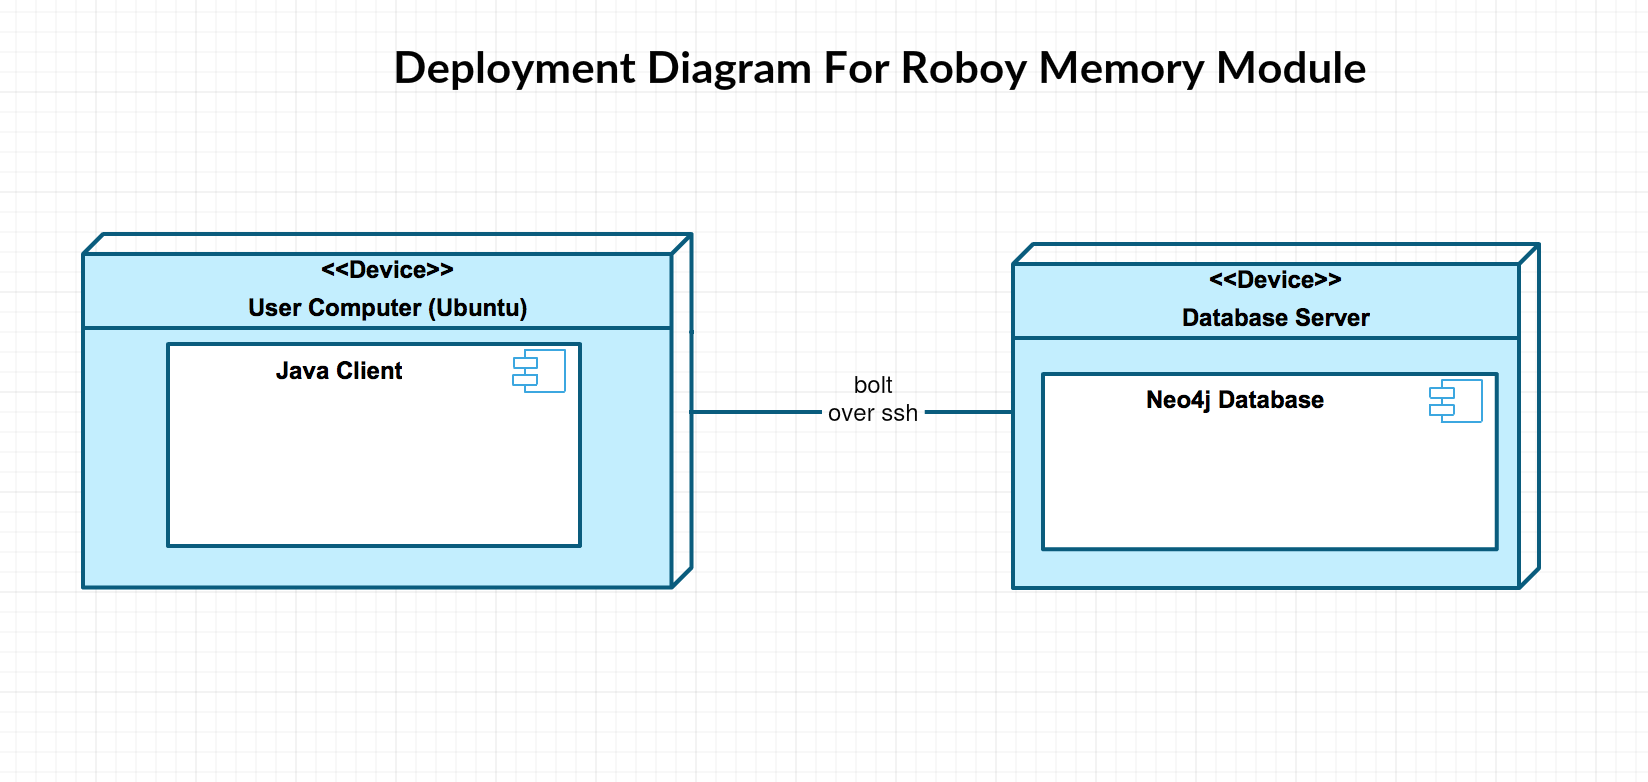 Deployment diagram shows which part of software runs on which machine or device